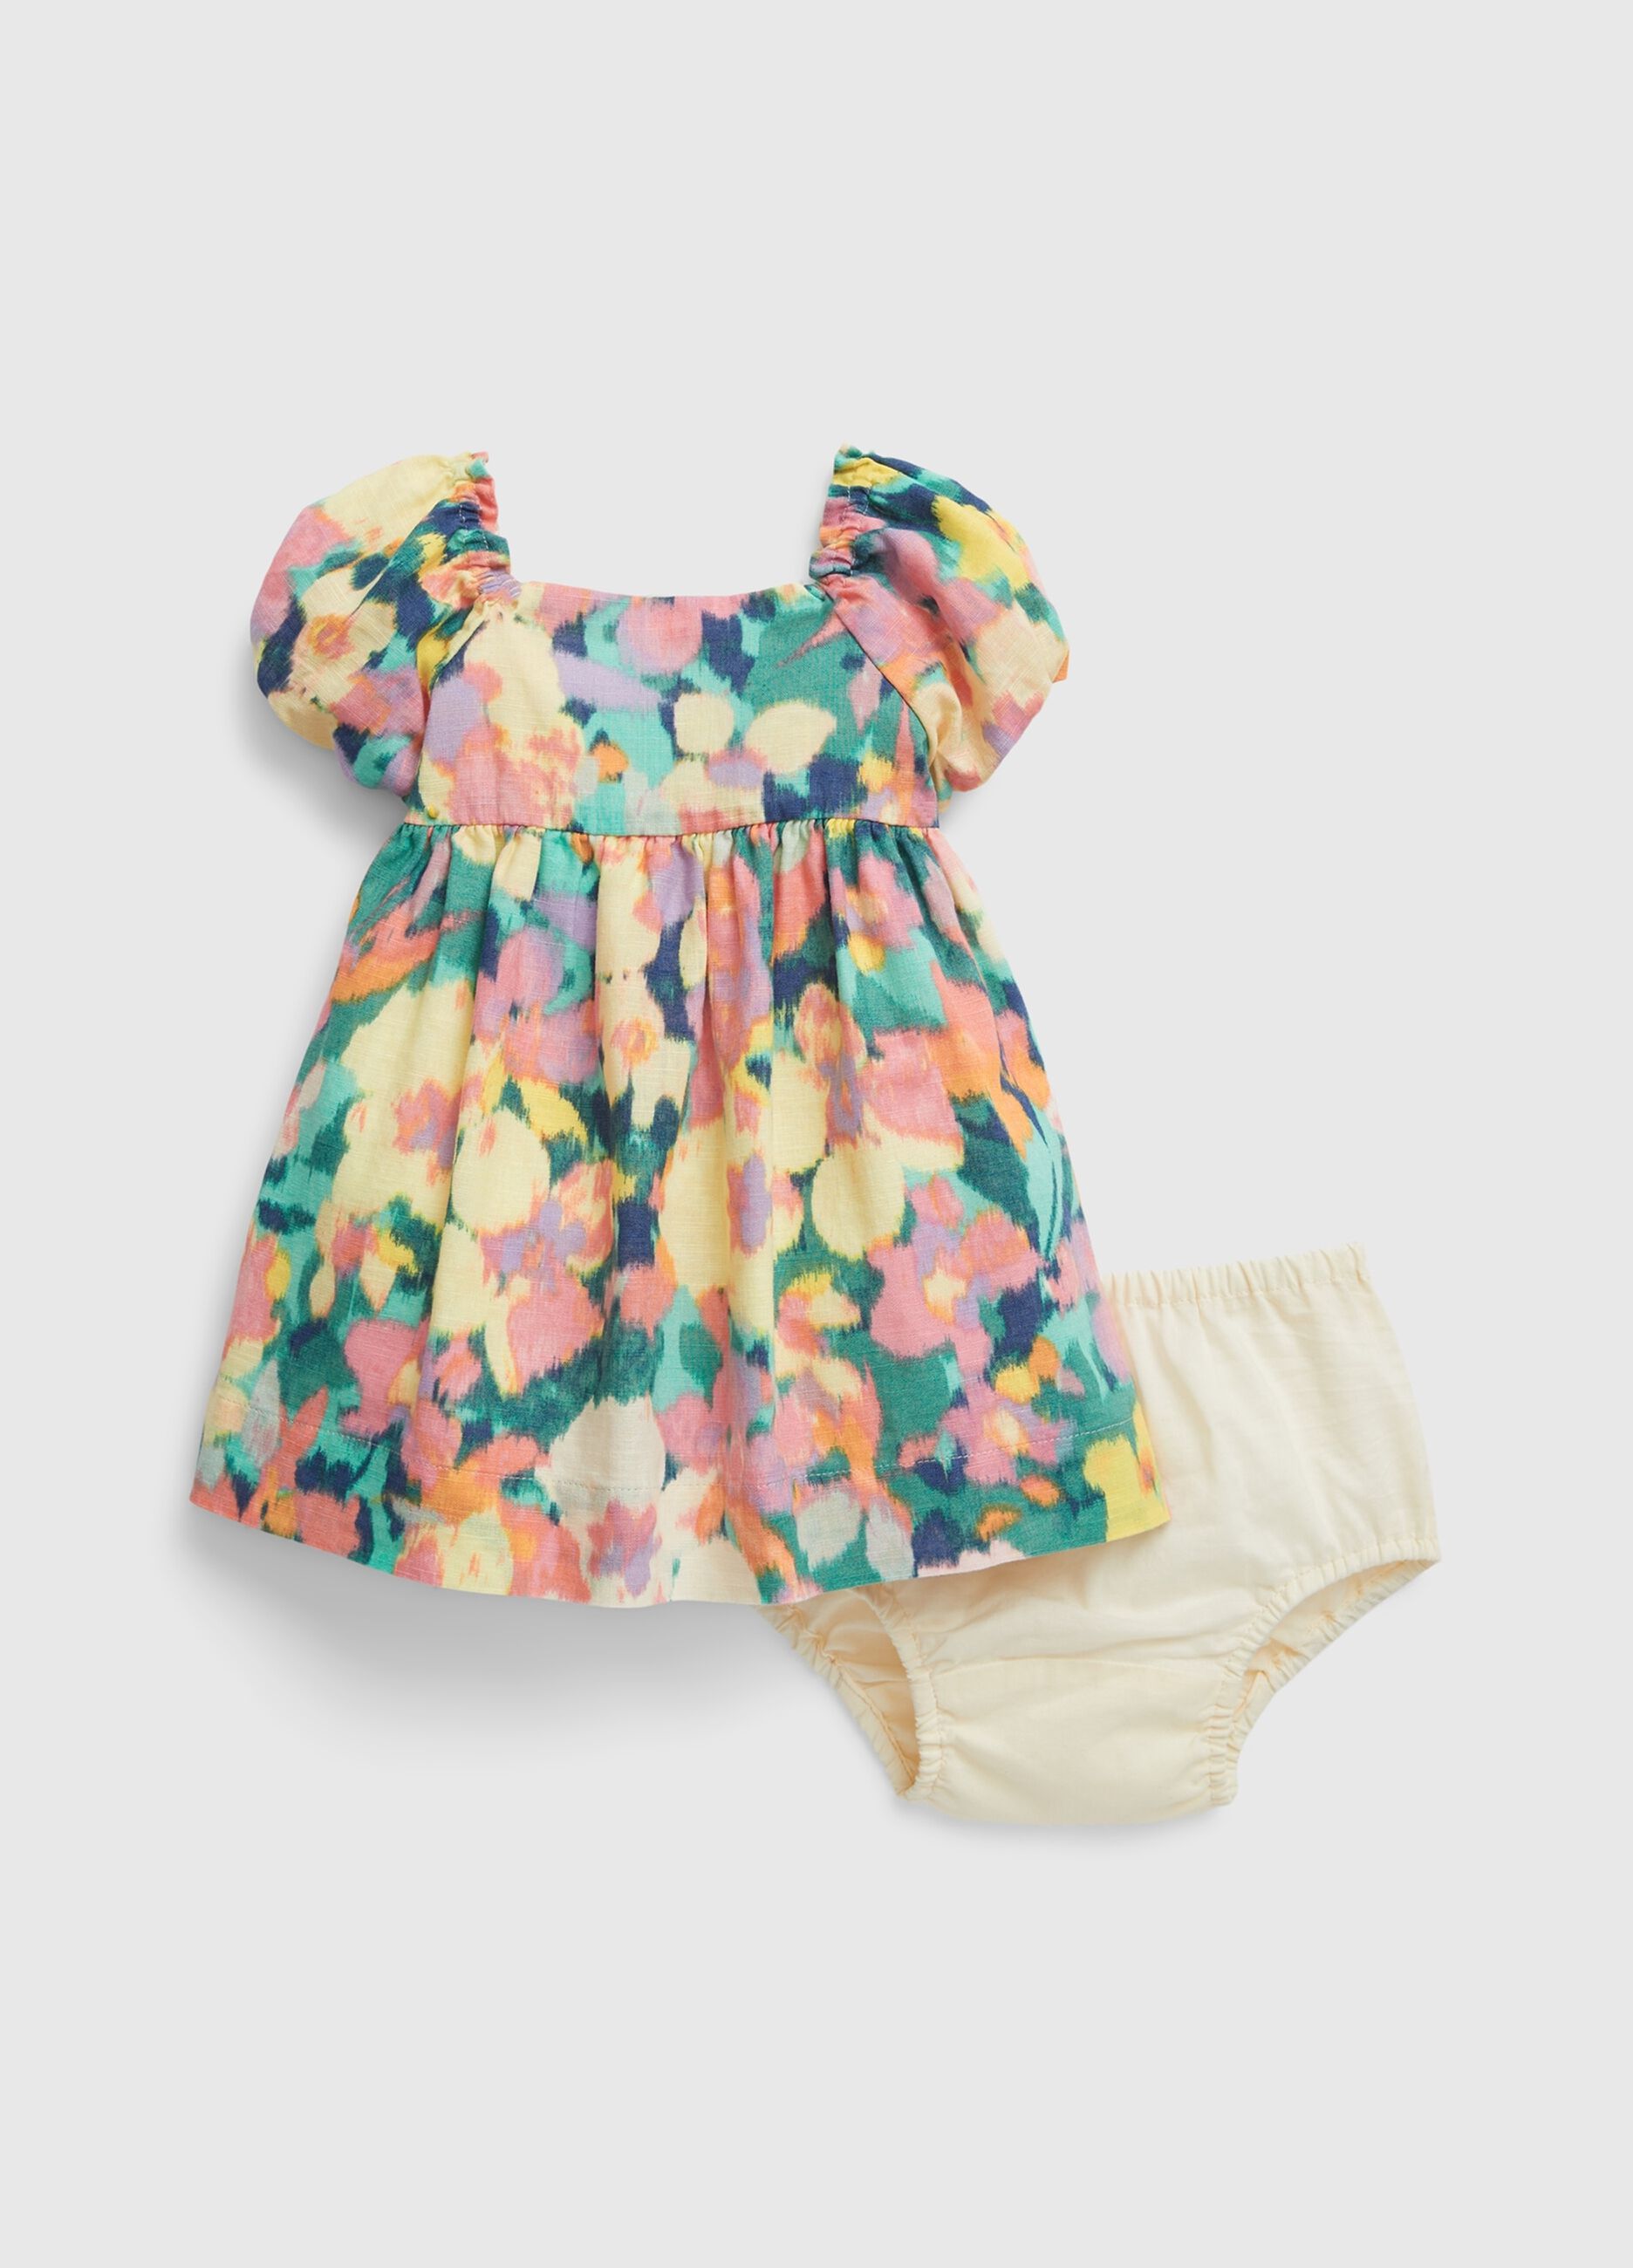 Linen and cotton dress and knicker shorts set